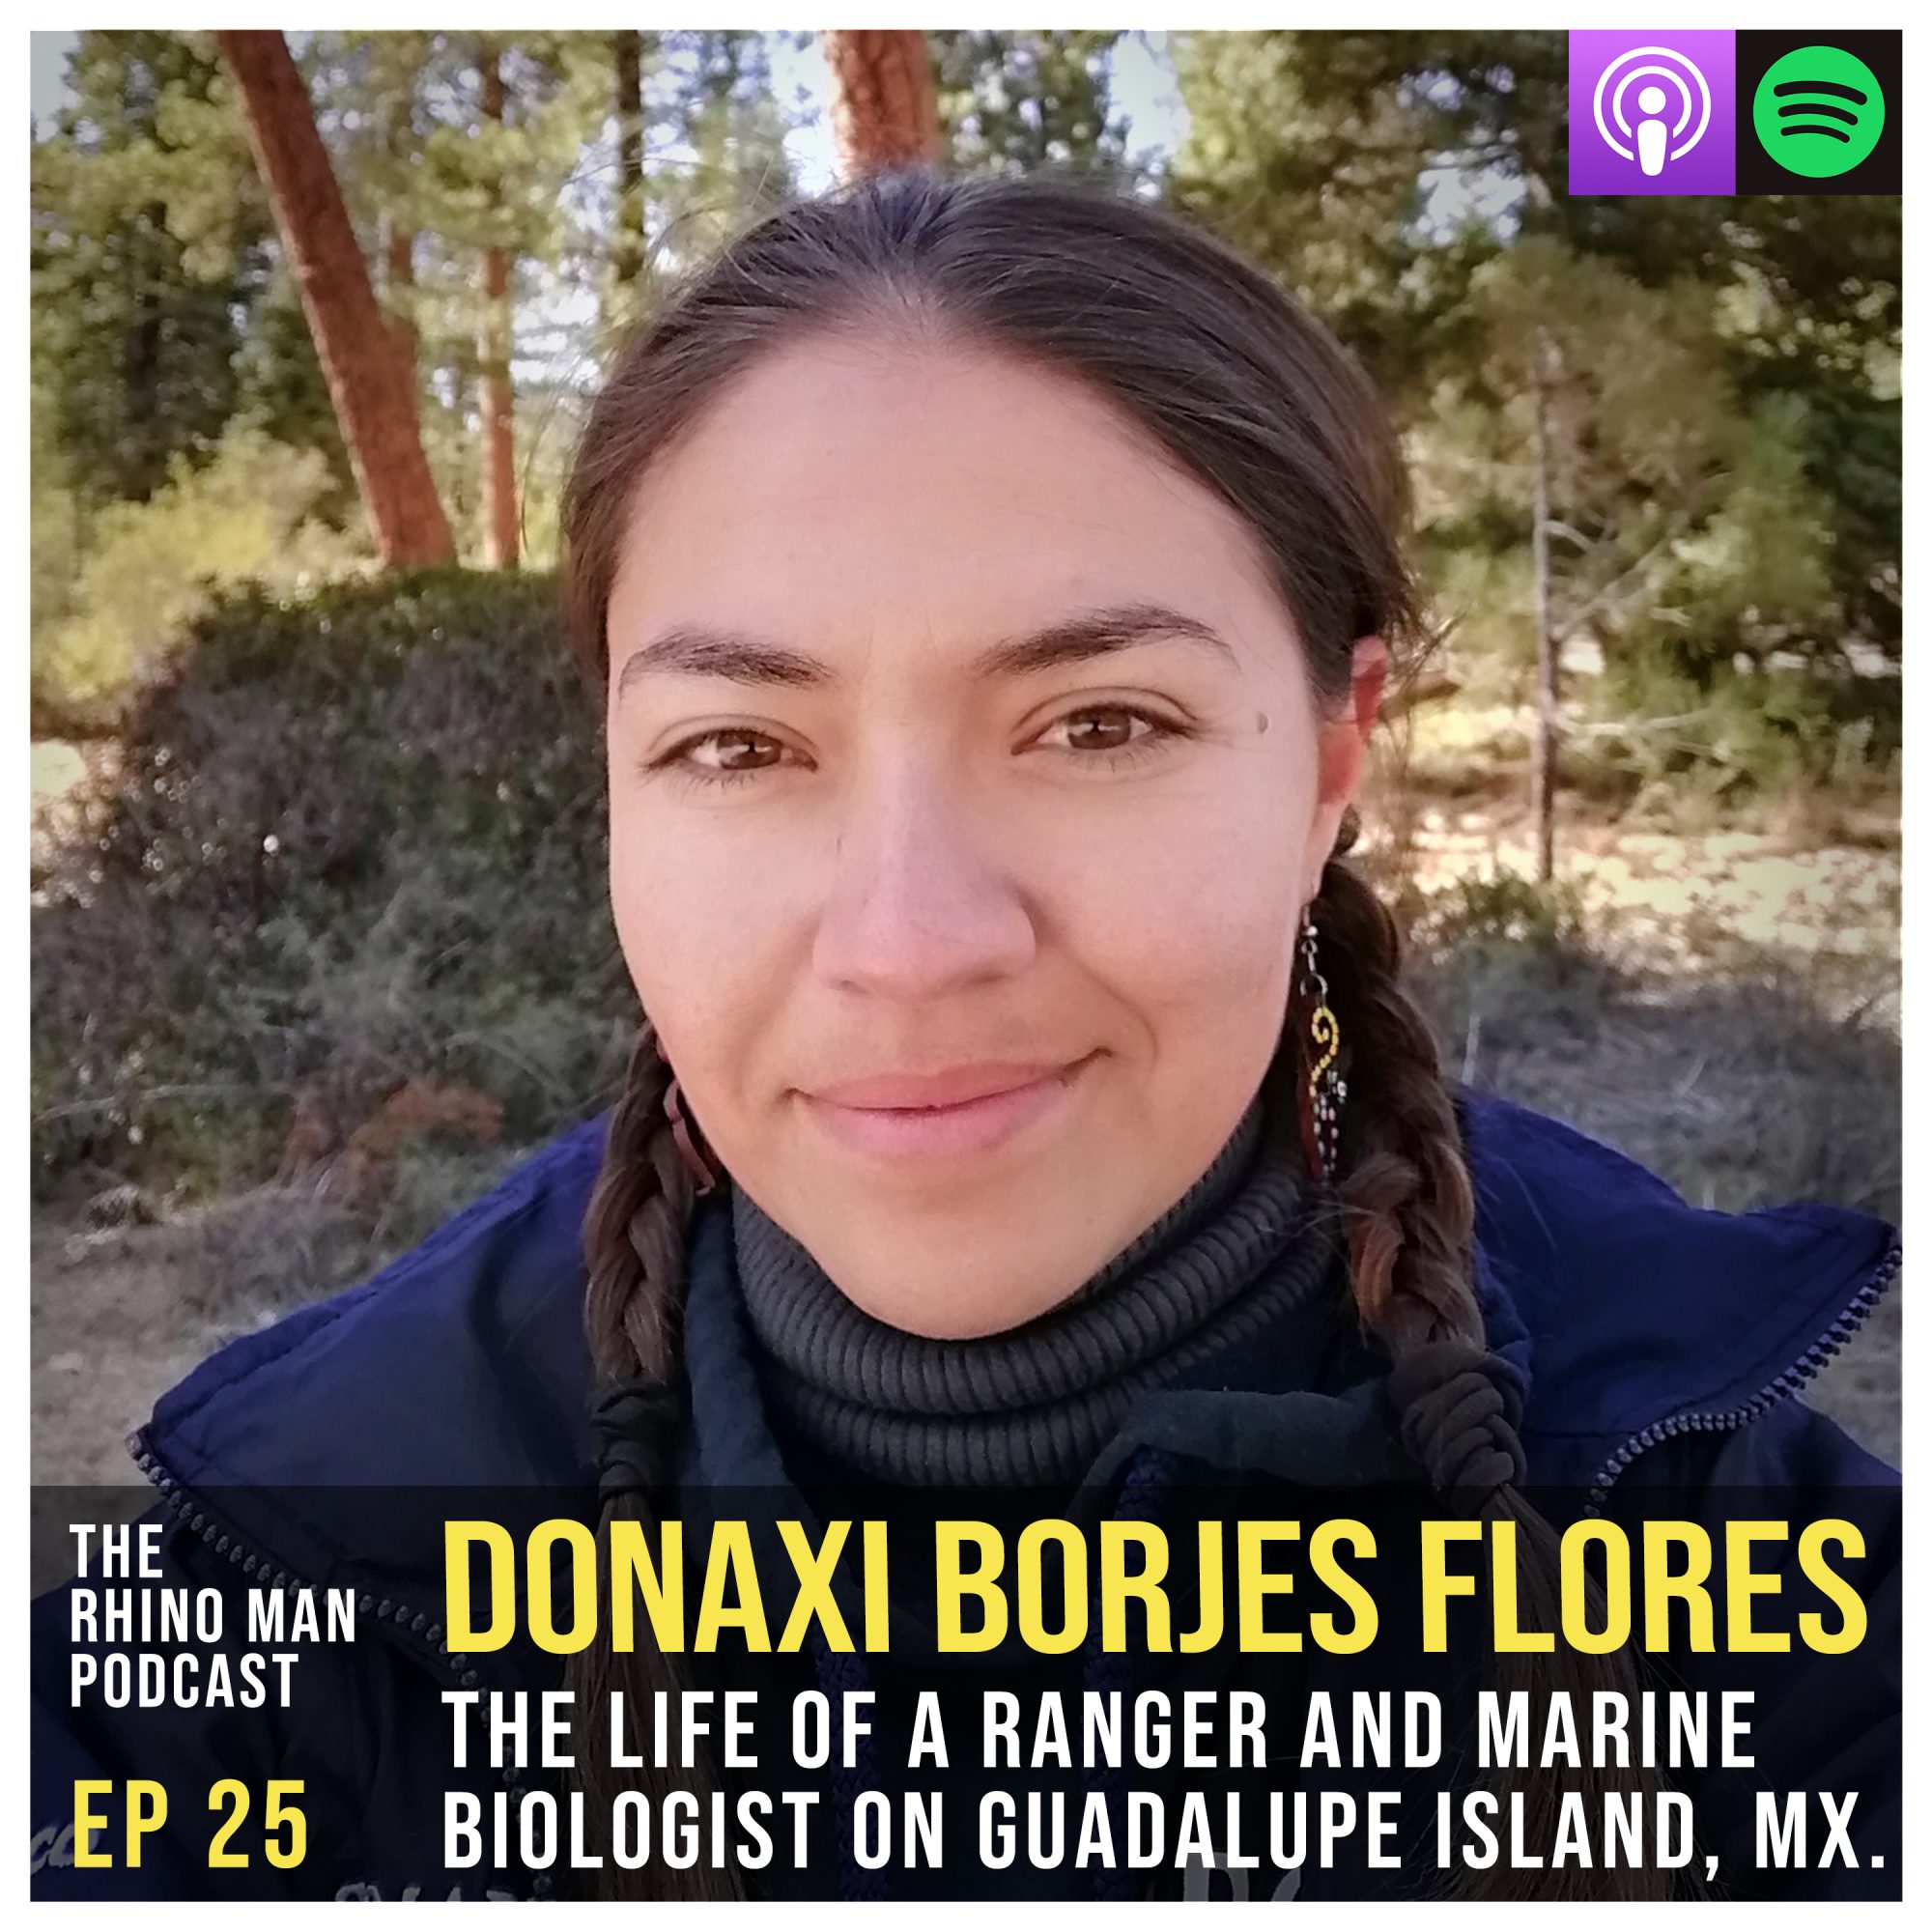 Ep 25: Donaxi Borjes Flores – The life of a ranger and marine biologist on Guadalupe Island, MX.